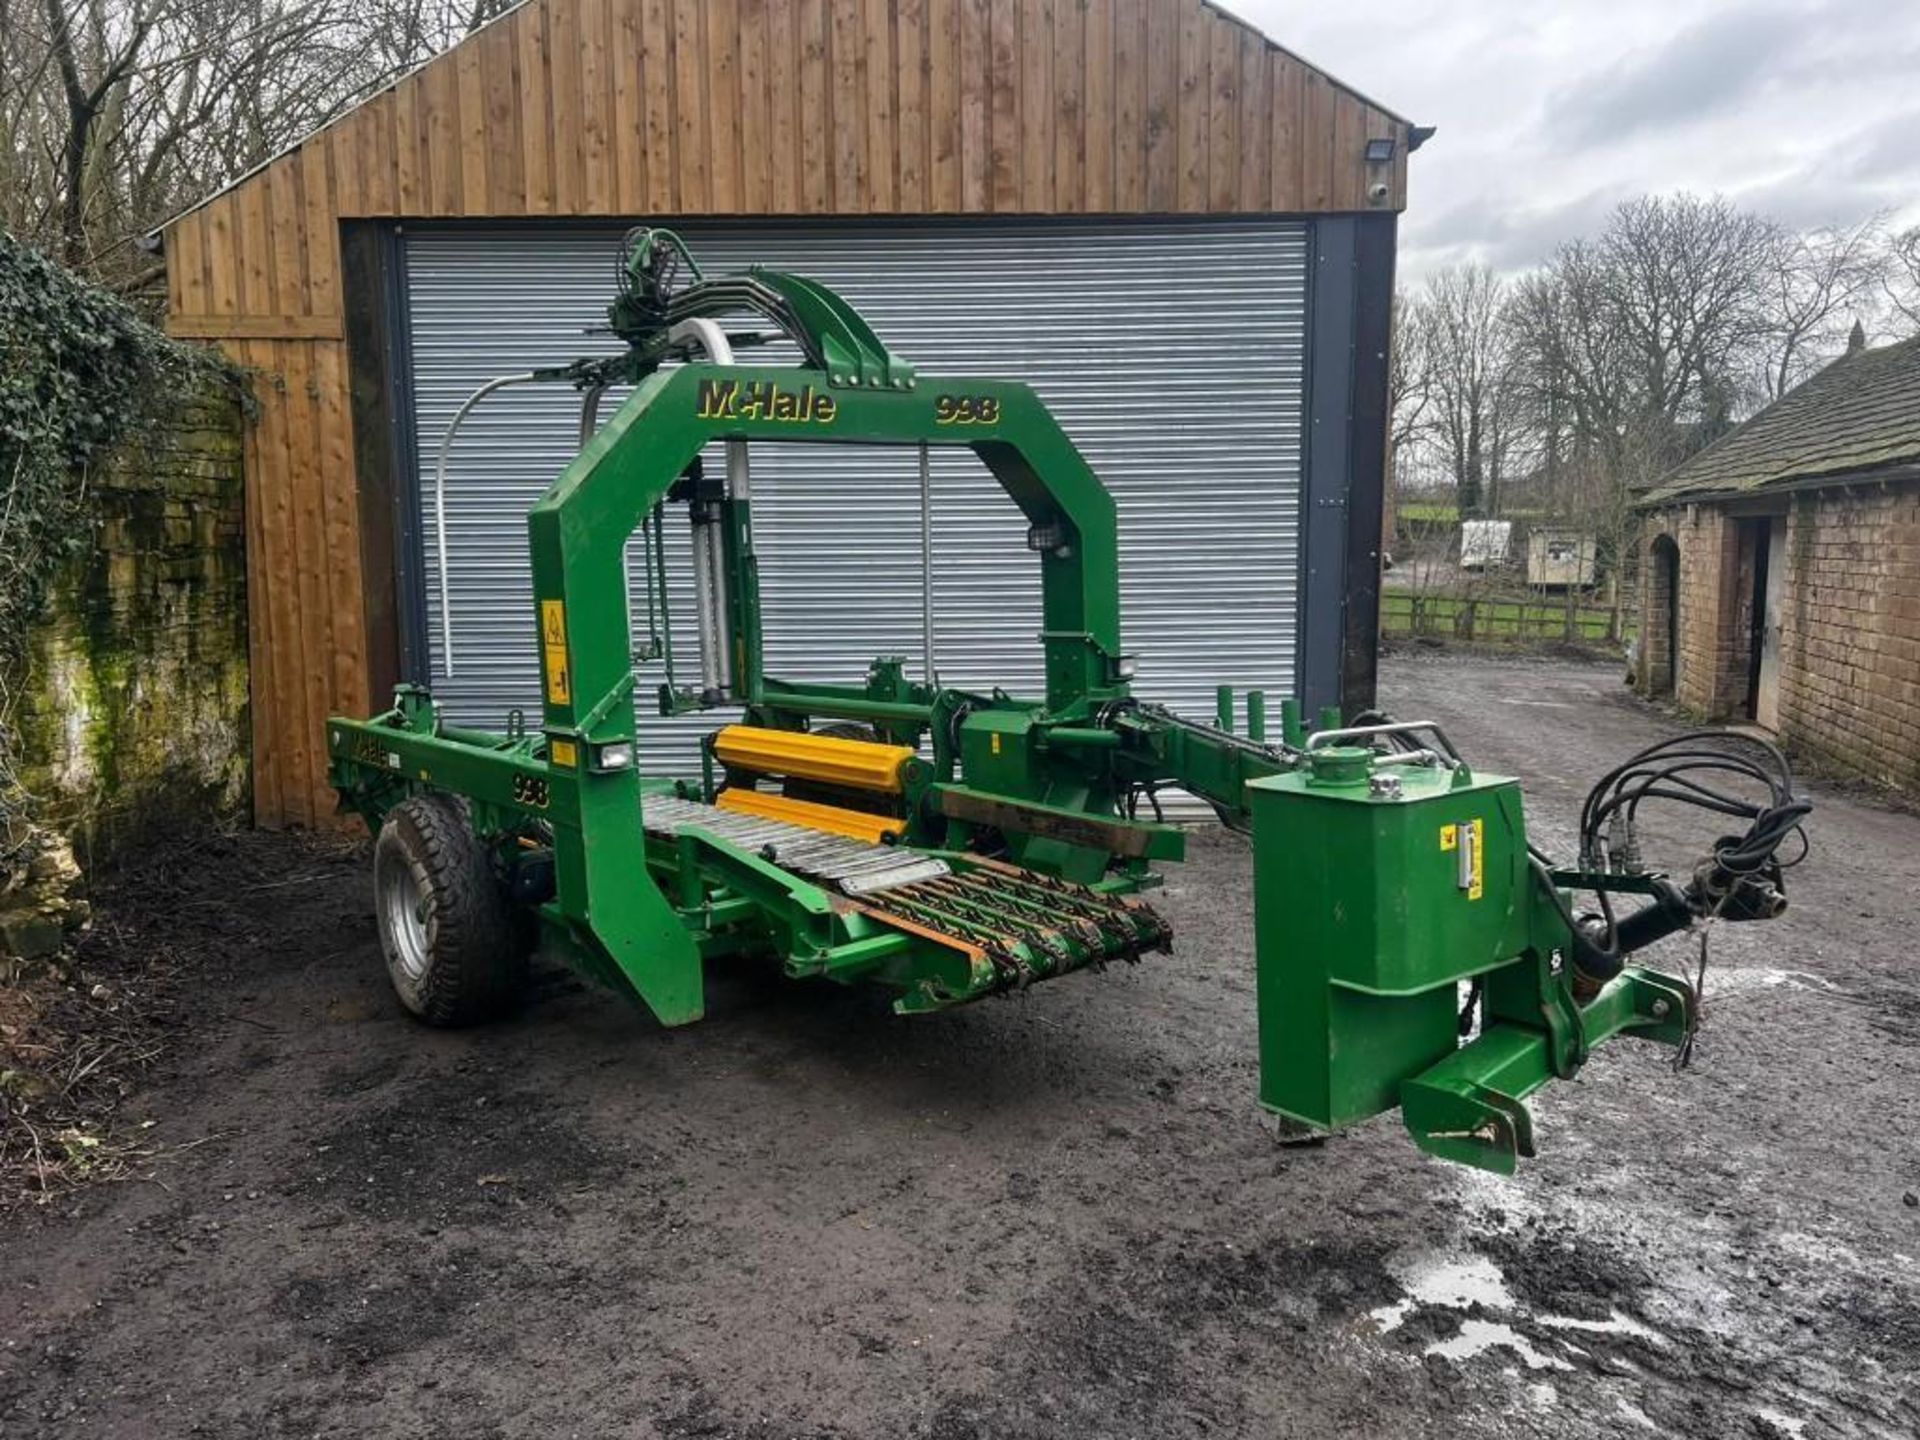 2017 McHale 998 Bale Wrapper (Yorkshire) - Image 3 of 16